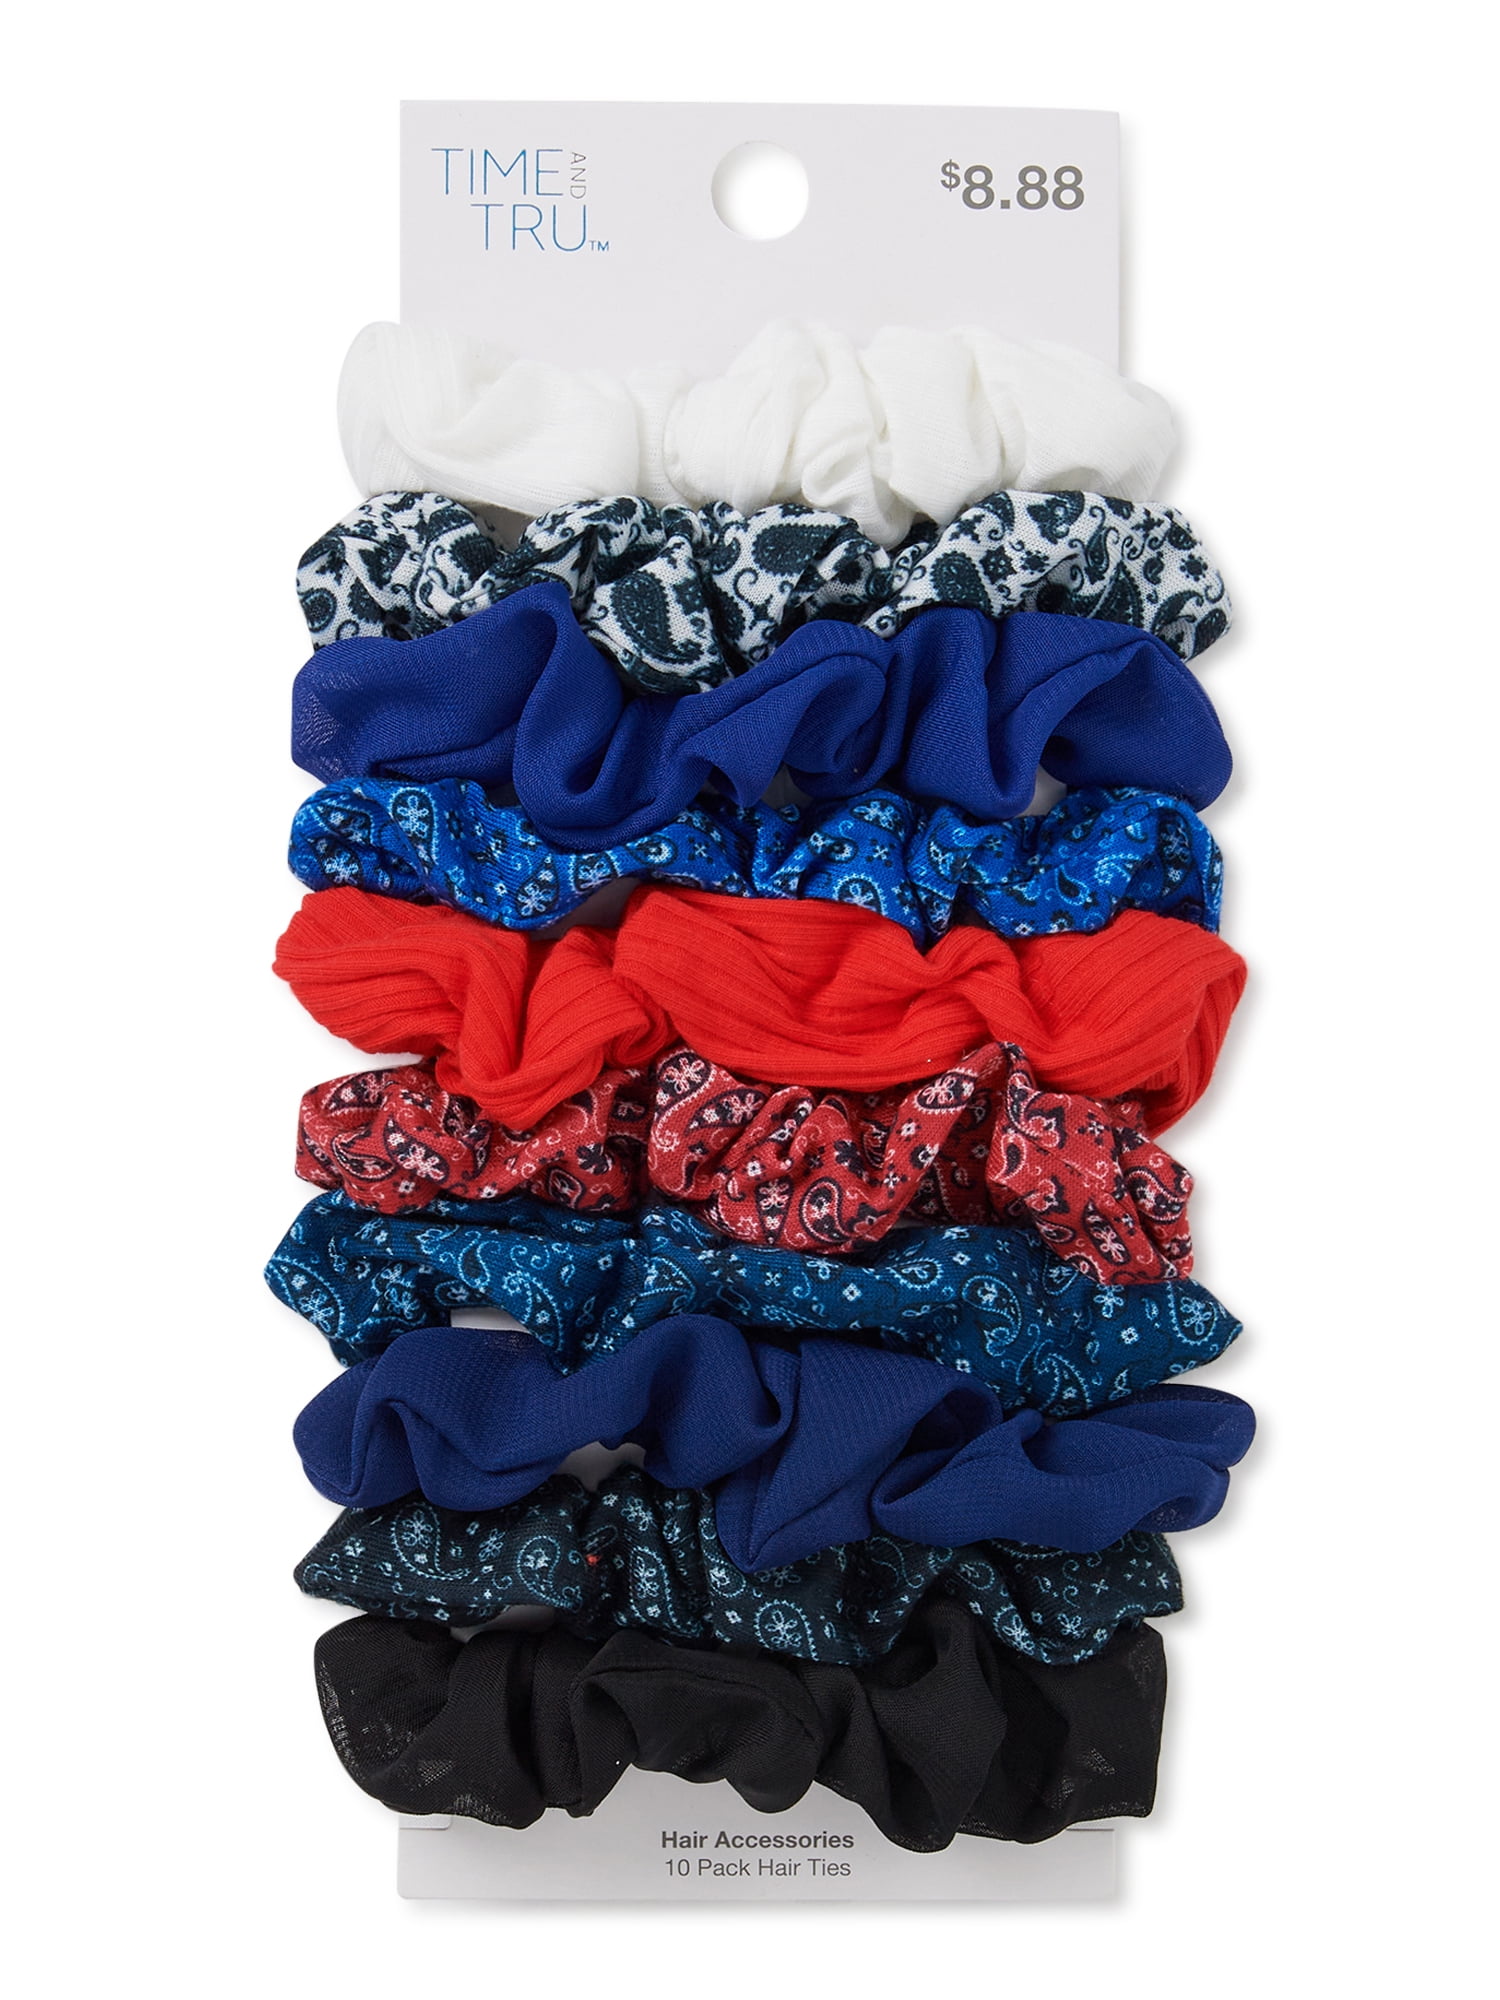 Time and Tru Hair Tie Set, 10-Pack